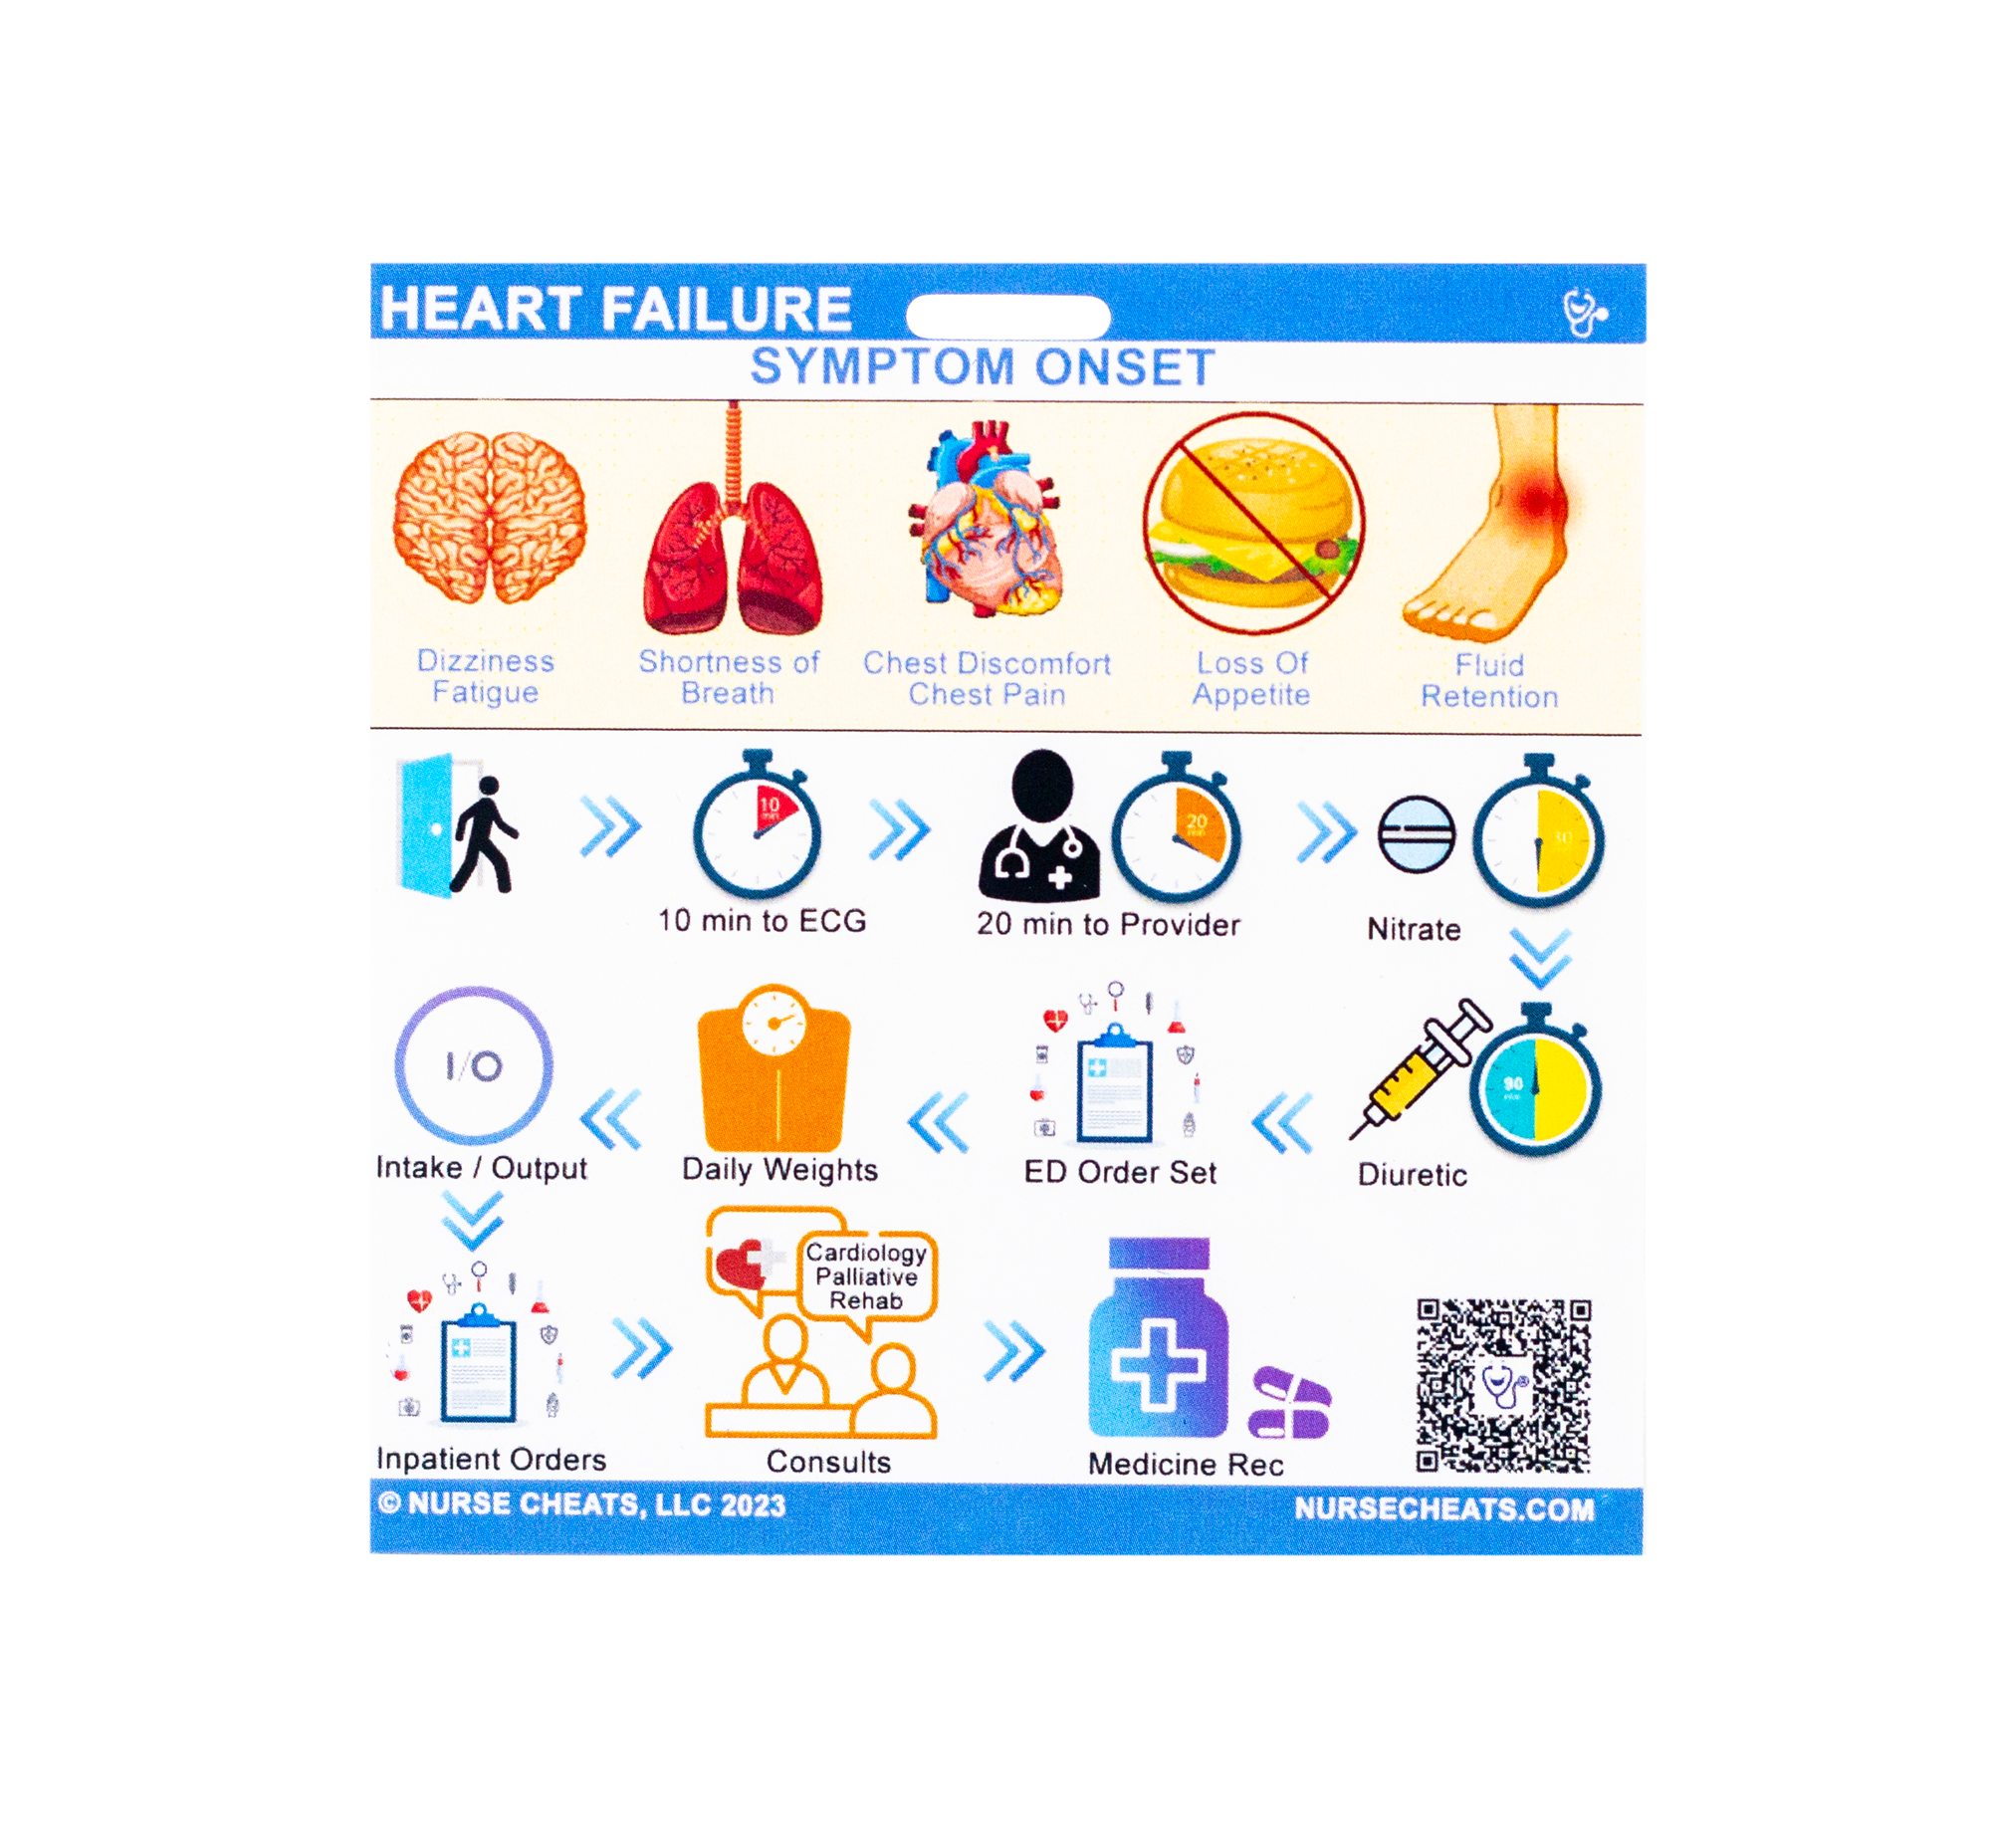 This Heart Failure badge is great for all nurses in all specialties.  It contains the types, order set, assessment, stages of heart failure, discharge instructions and the timing for heart failure patients.